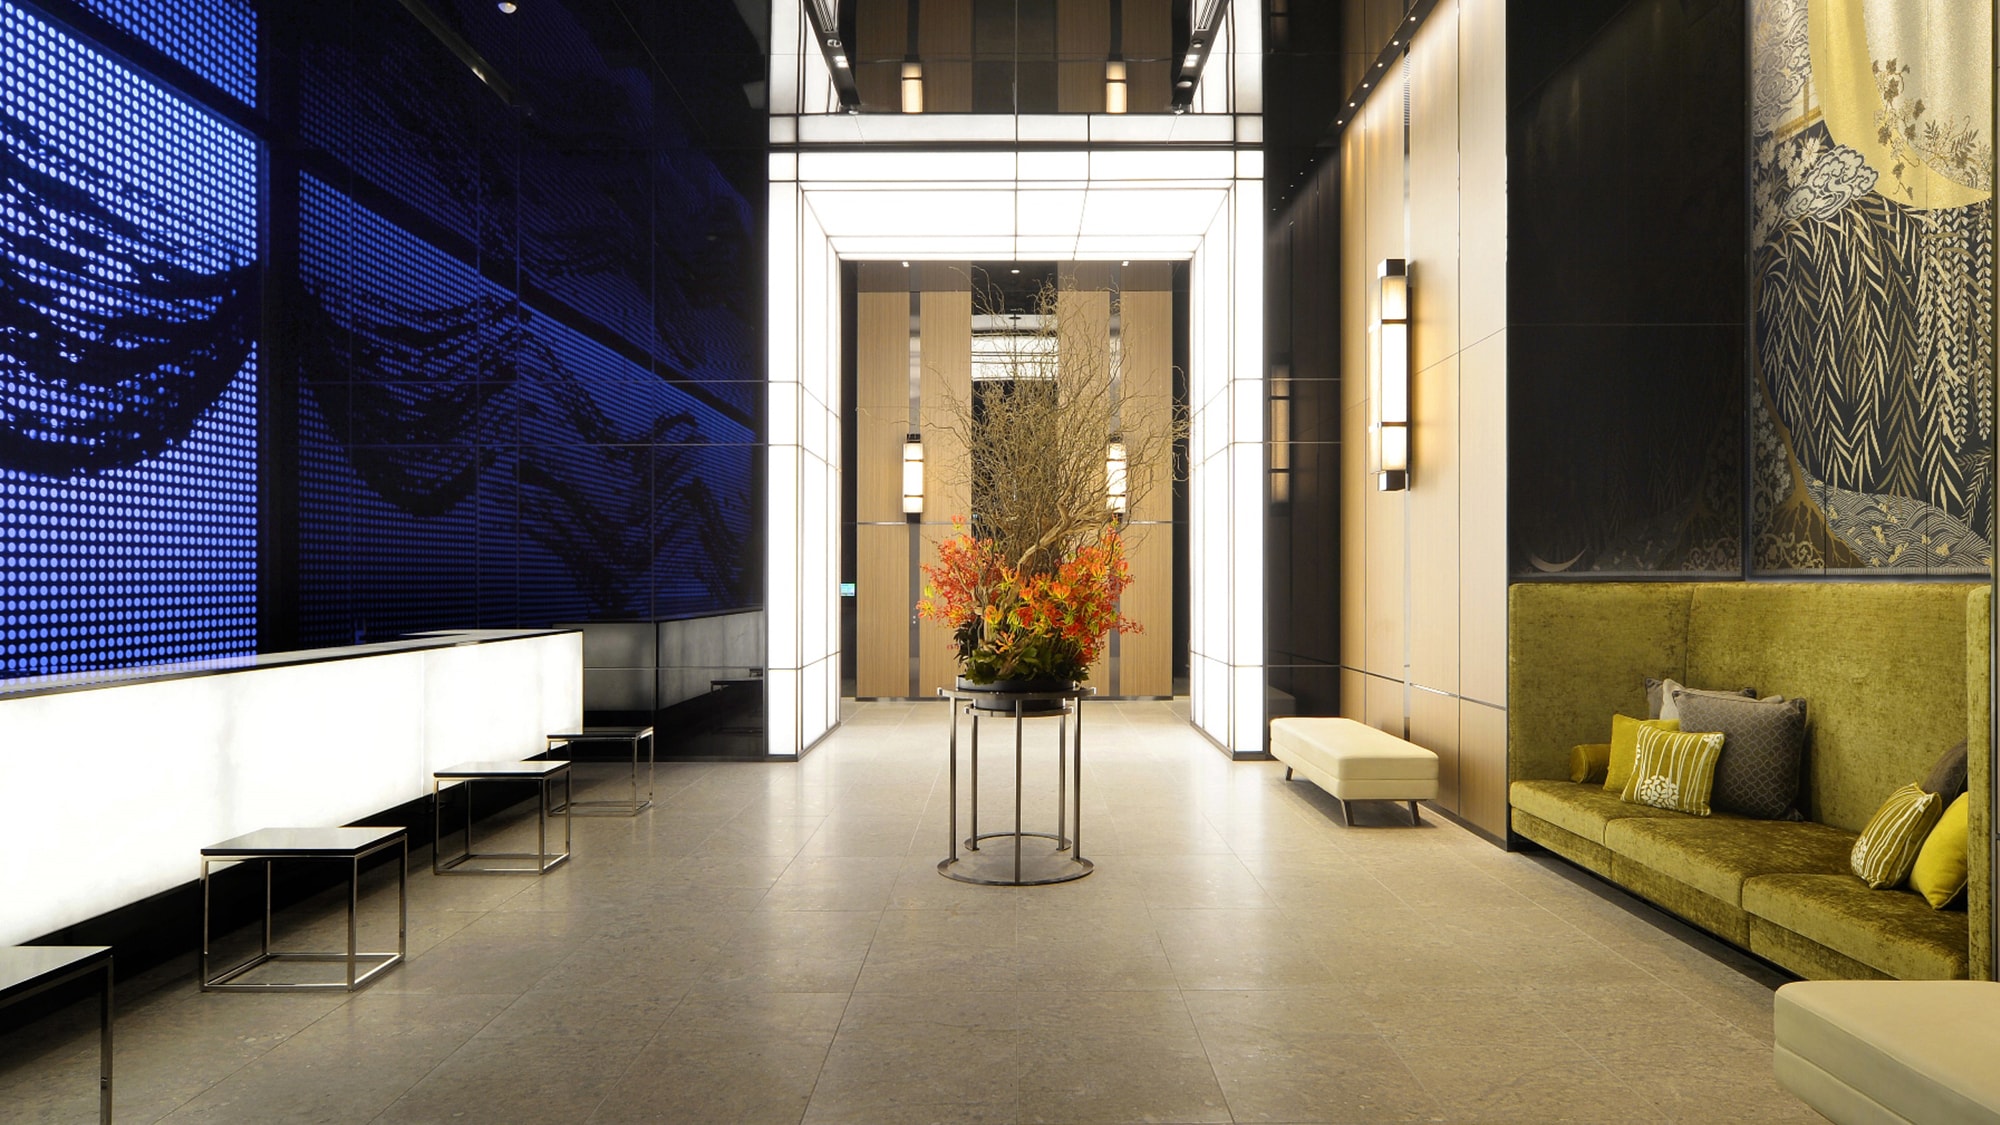 A lobby designed by an overseas designer that takes advantage of the height of the ceiling